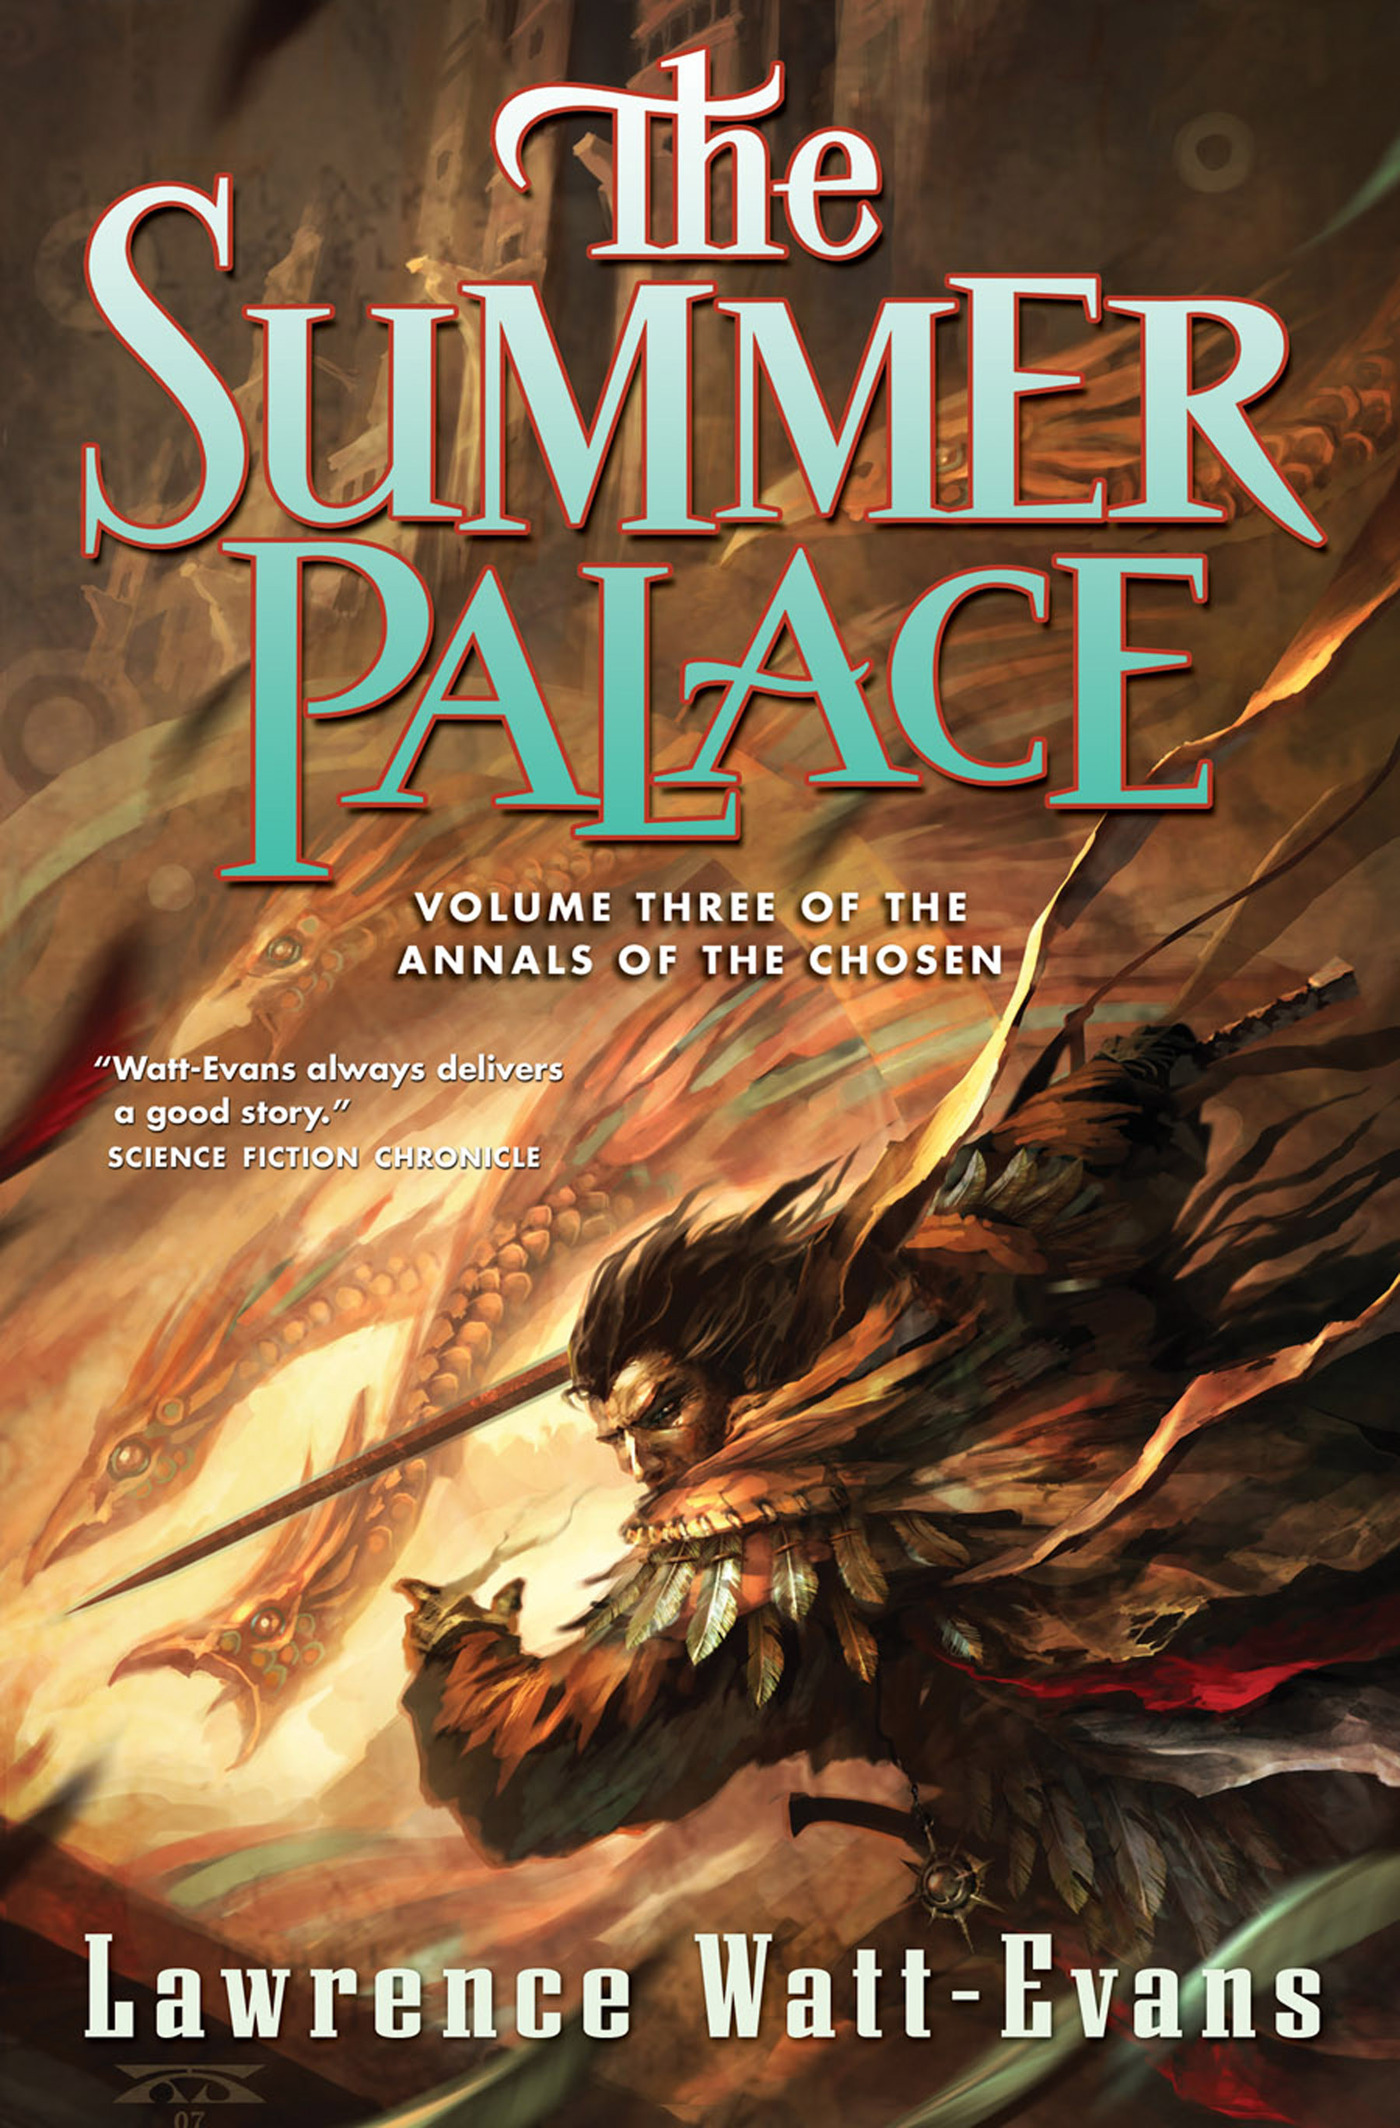 The Summer Palace : Volume Three of the Annals of the Chosen by Lawrence Watt-Evans